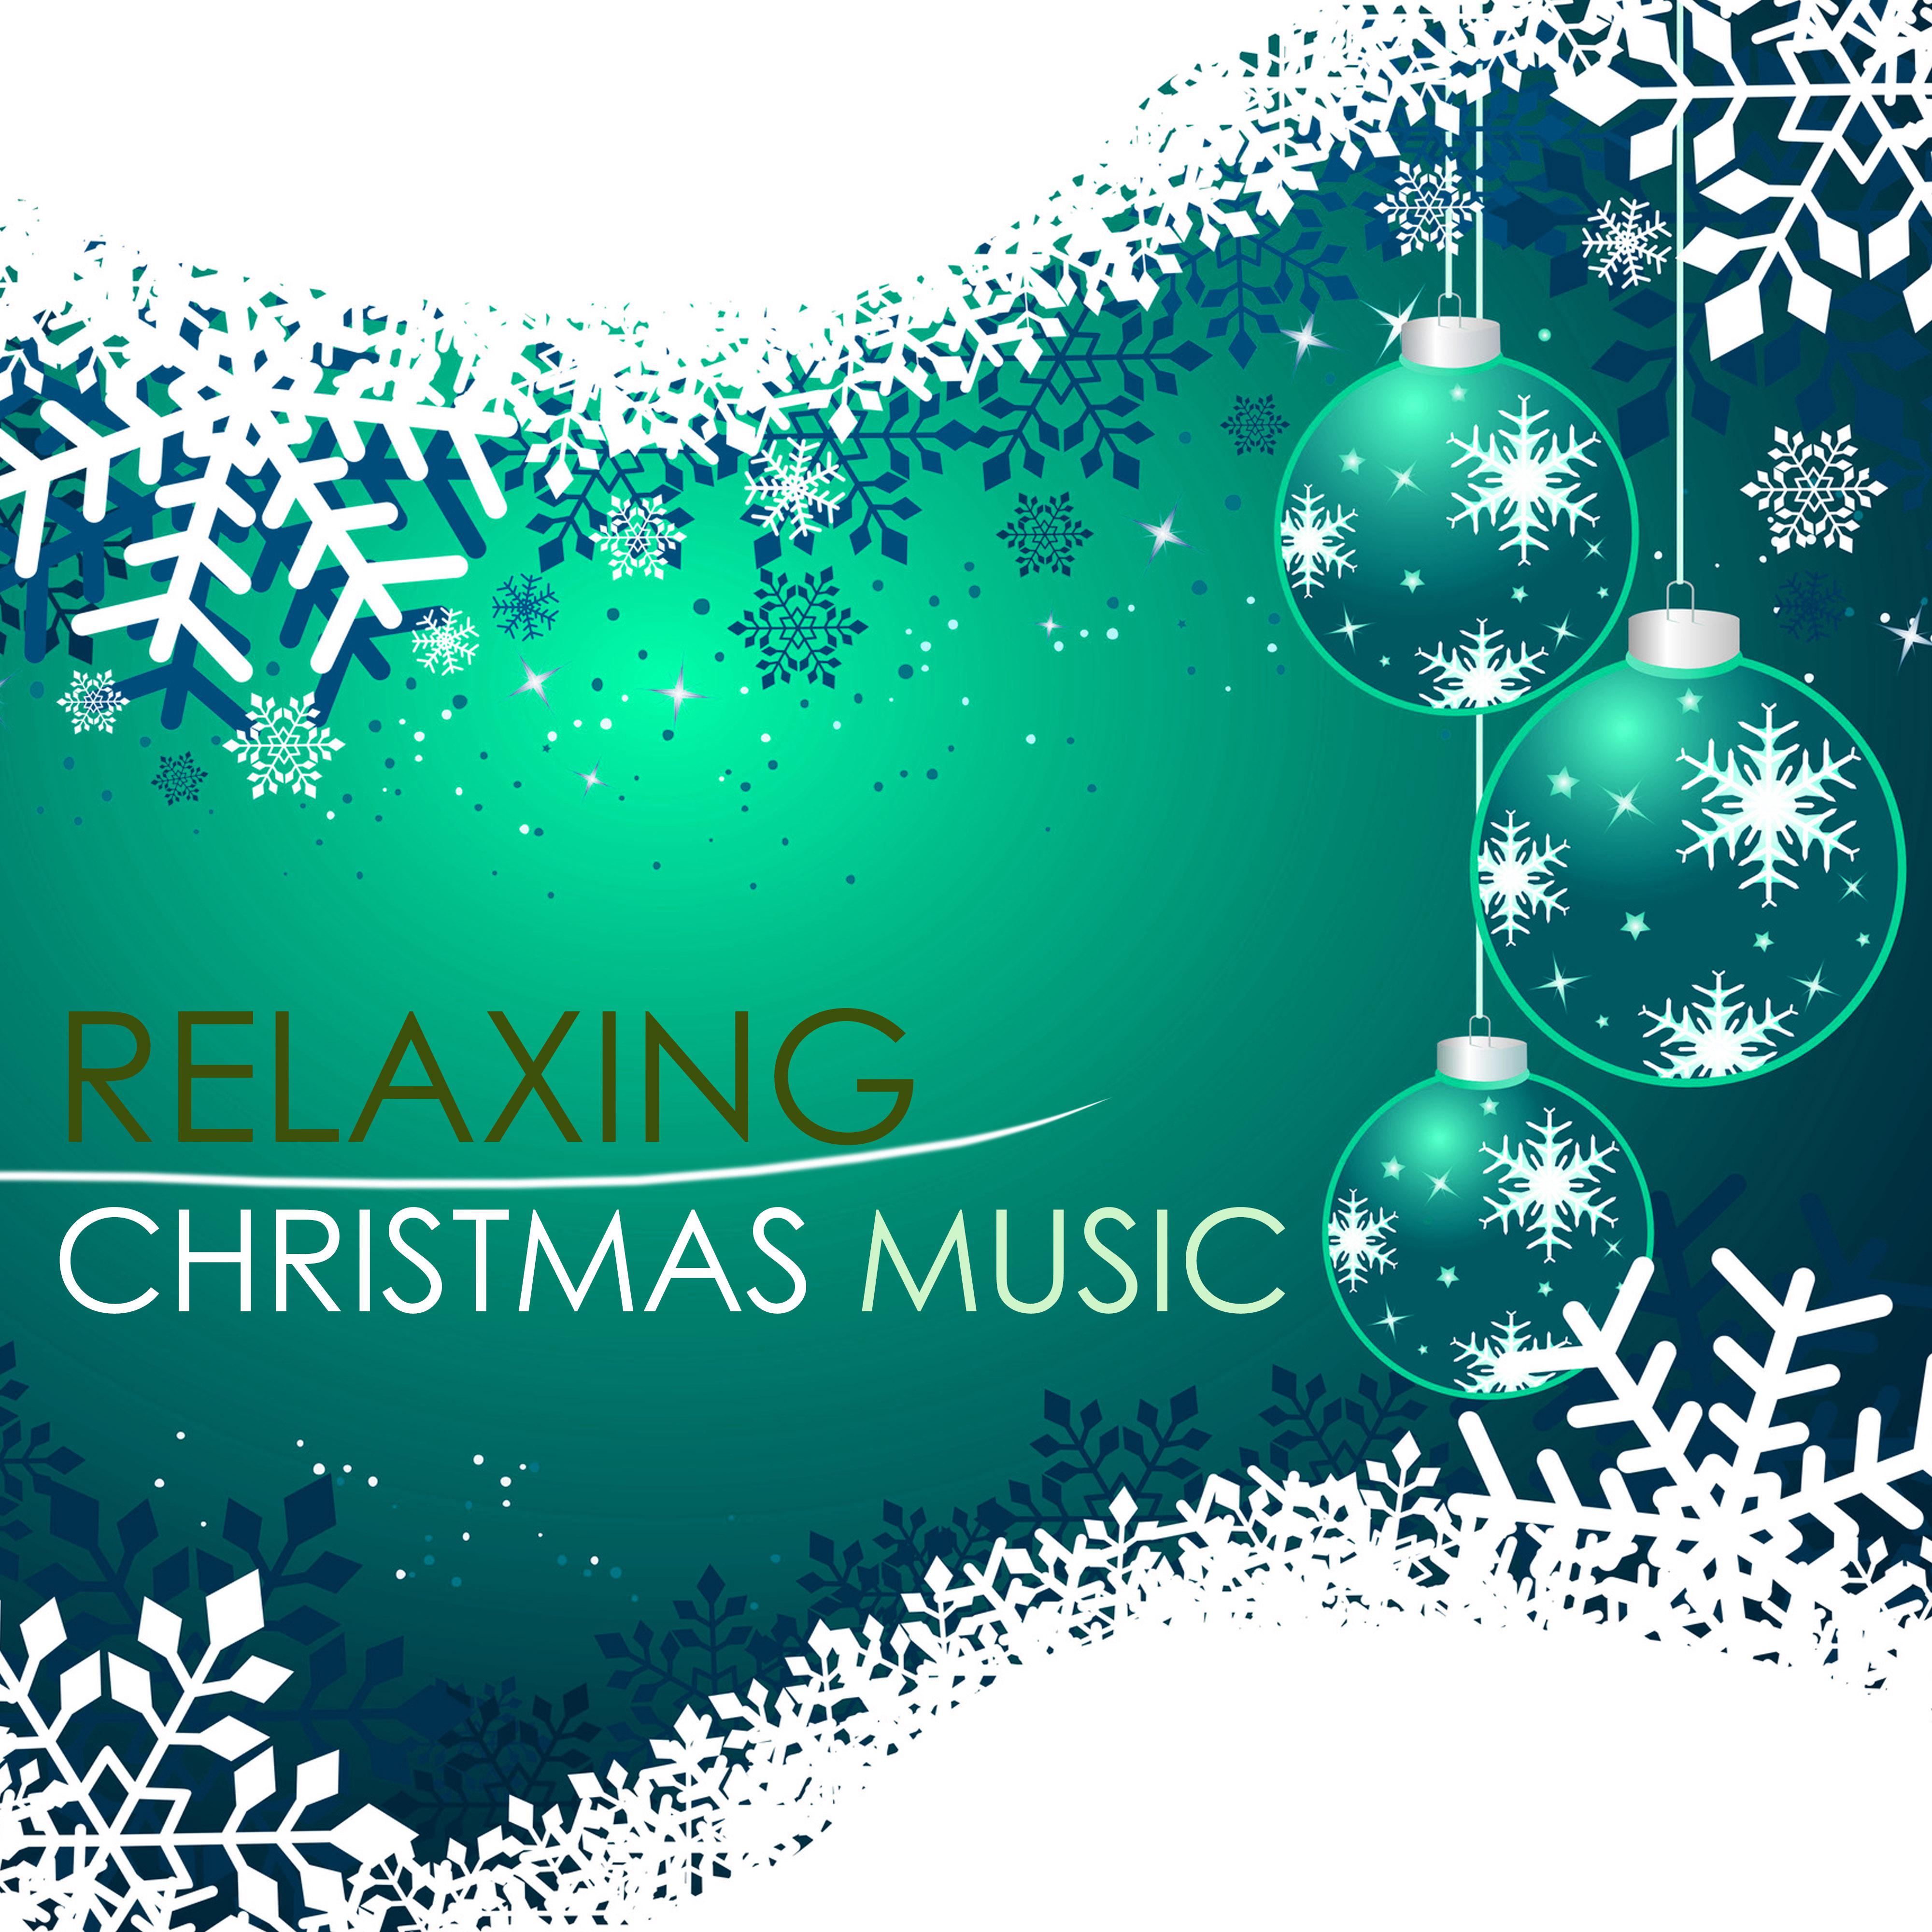 Relaxing Christmas Music - Relax Silent Night Songs to Listen While Waiting for Santa